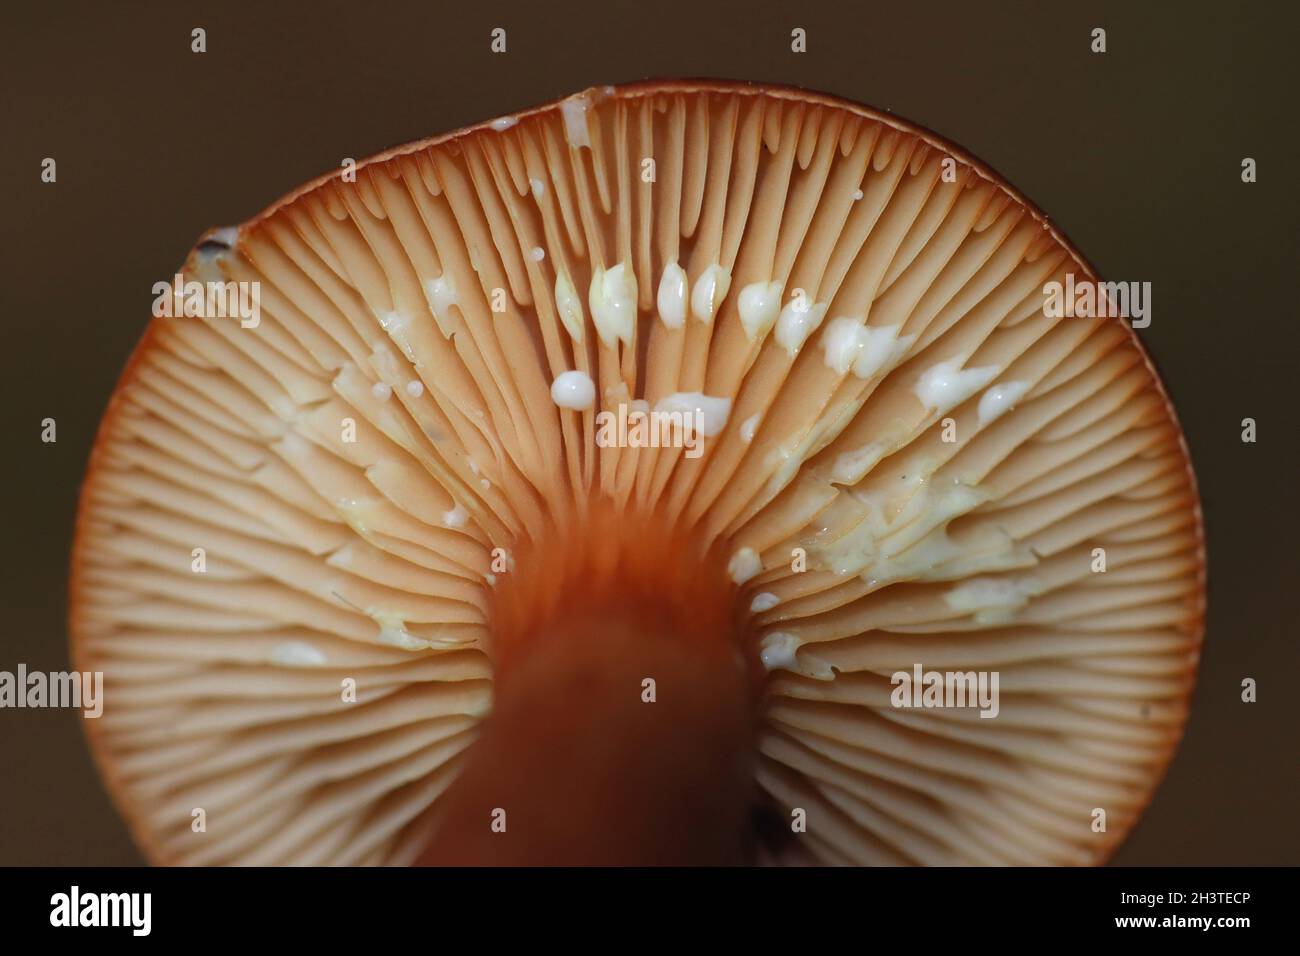 Liver Milkcap Lactarius hepaticus showing the milky latex fluid they exude when damaged that turns yellow on a hankerchief Stock Photo